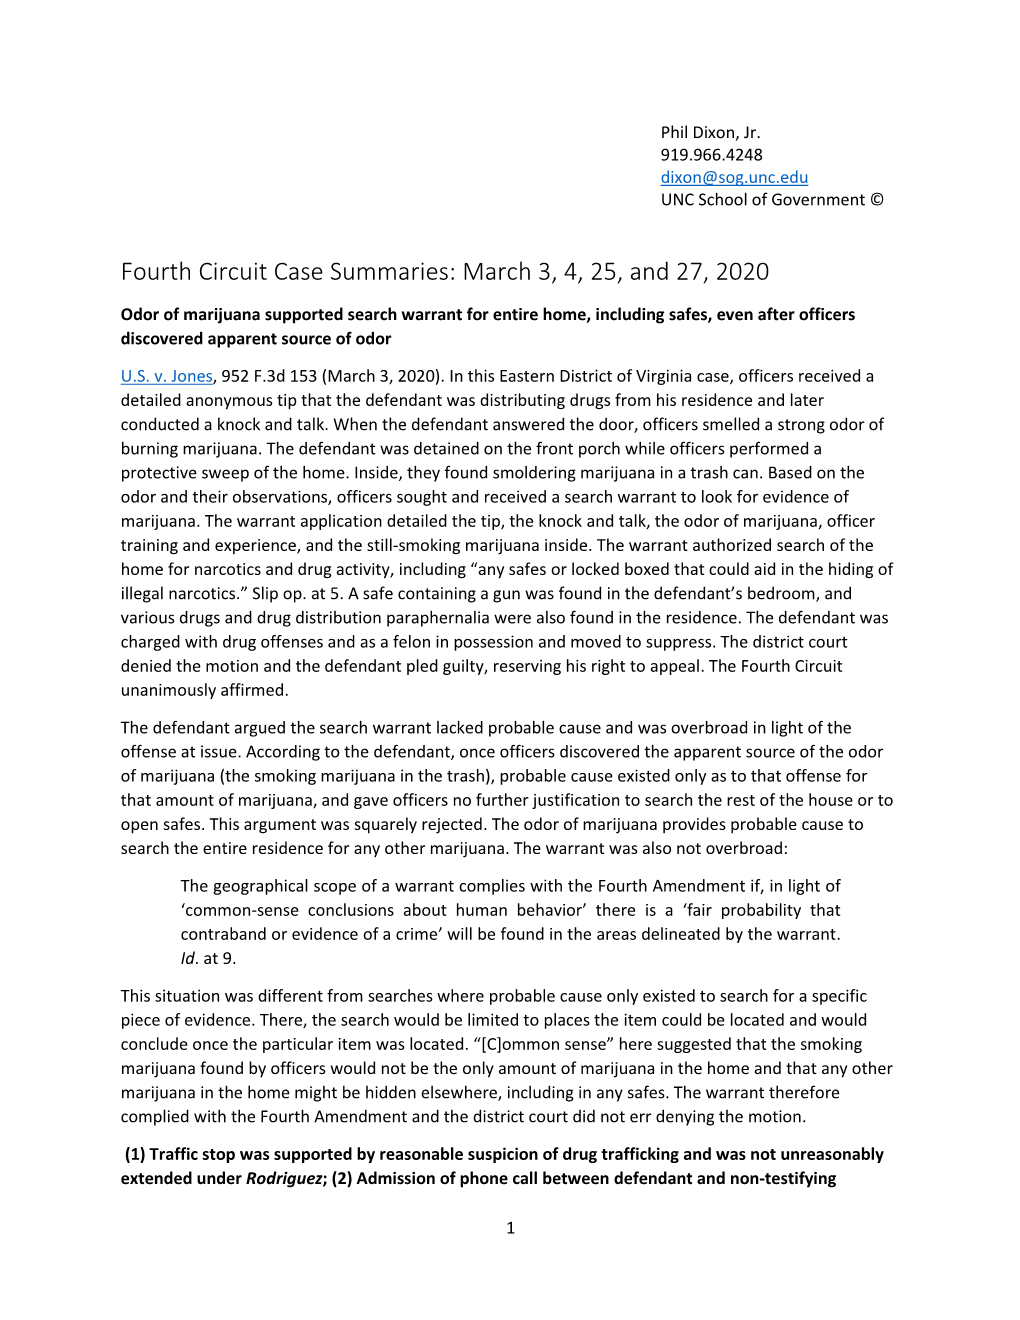 Fourth Circuit Case Summaries: March 3, 4, 25, and 27, 2020